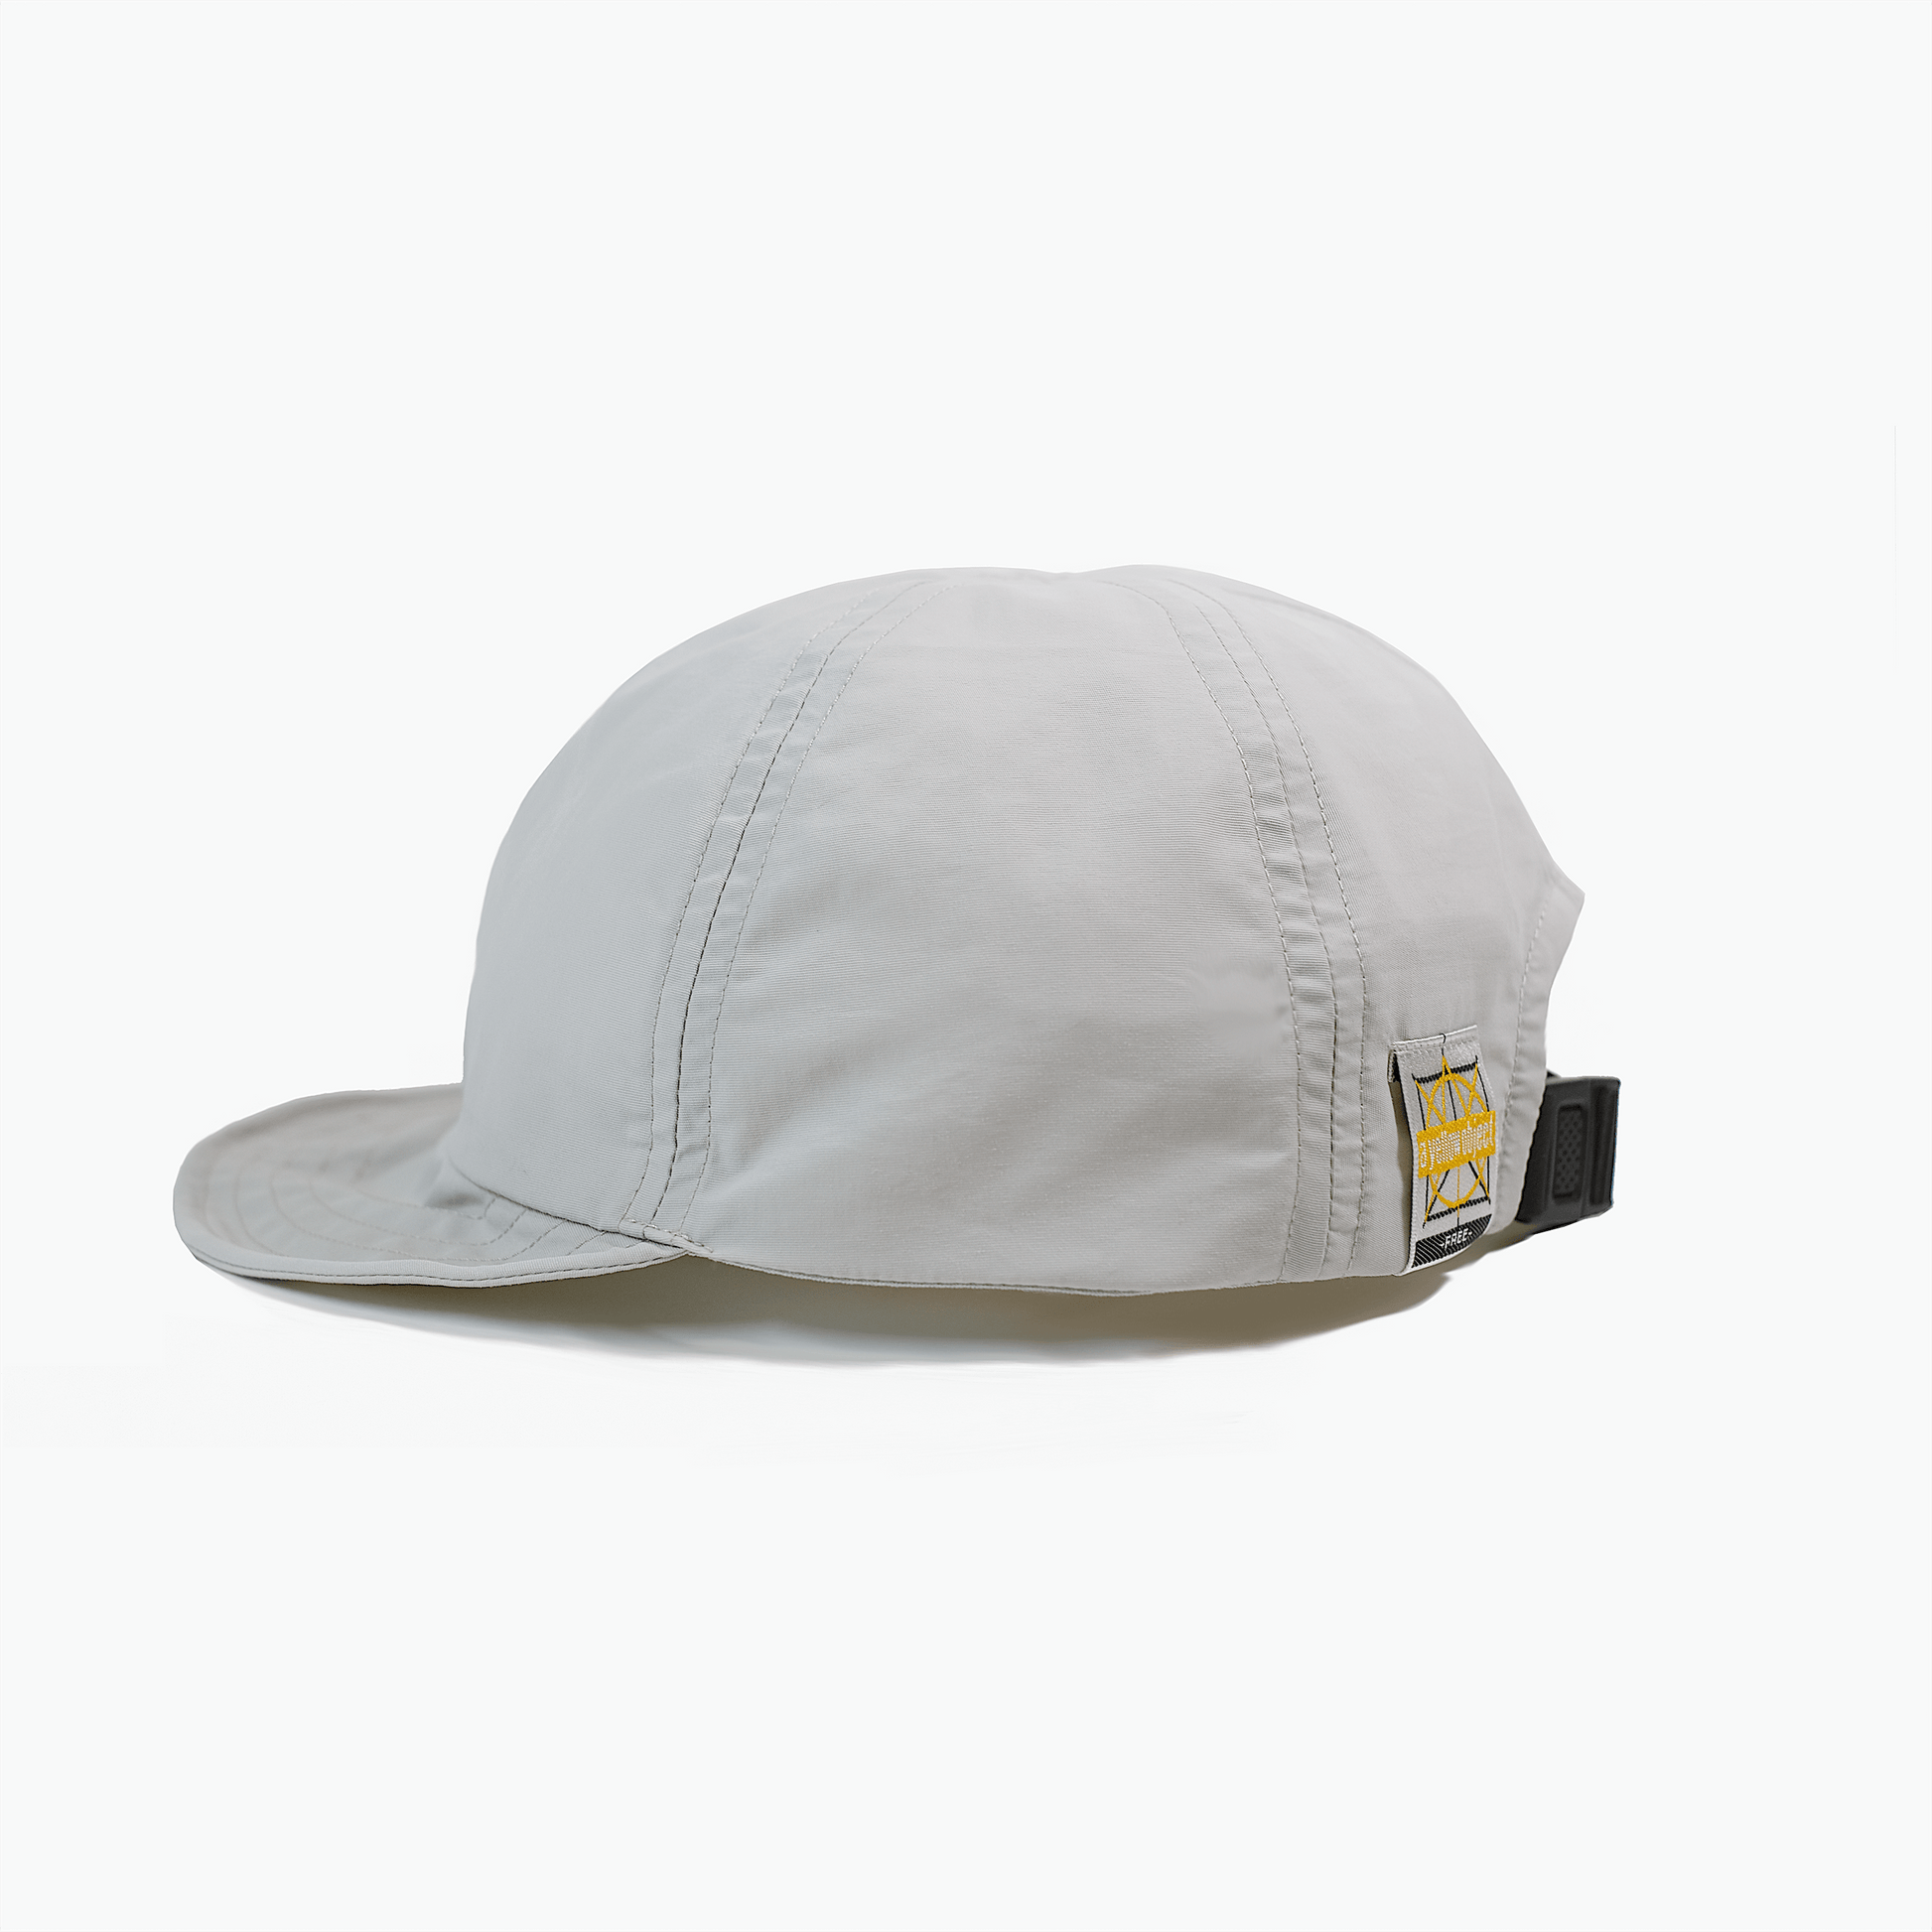 Just A Cap (Gray) - A Yellow Object